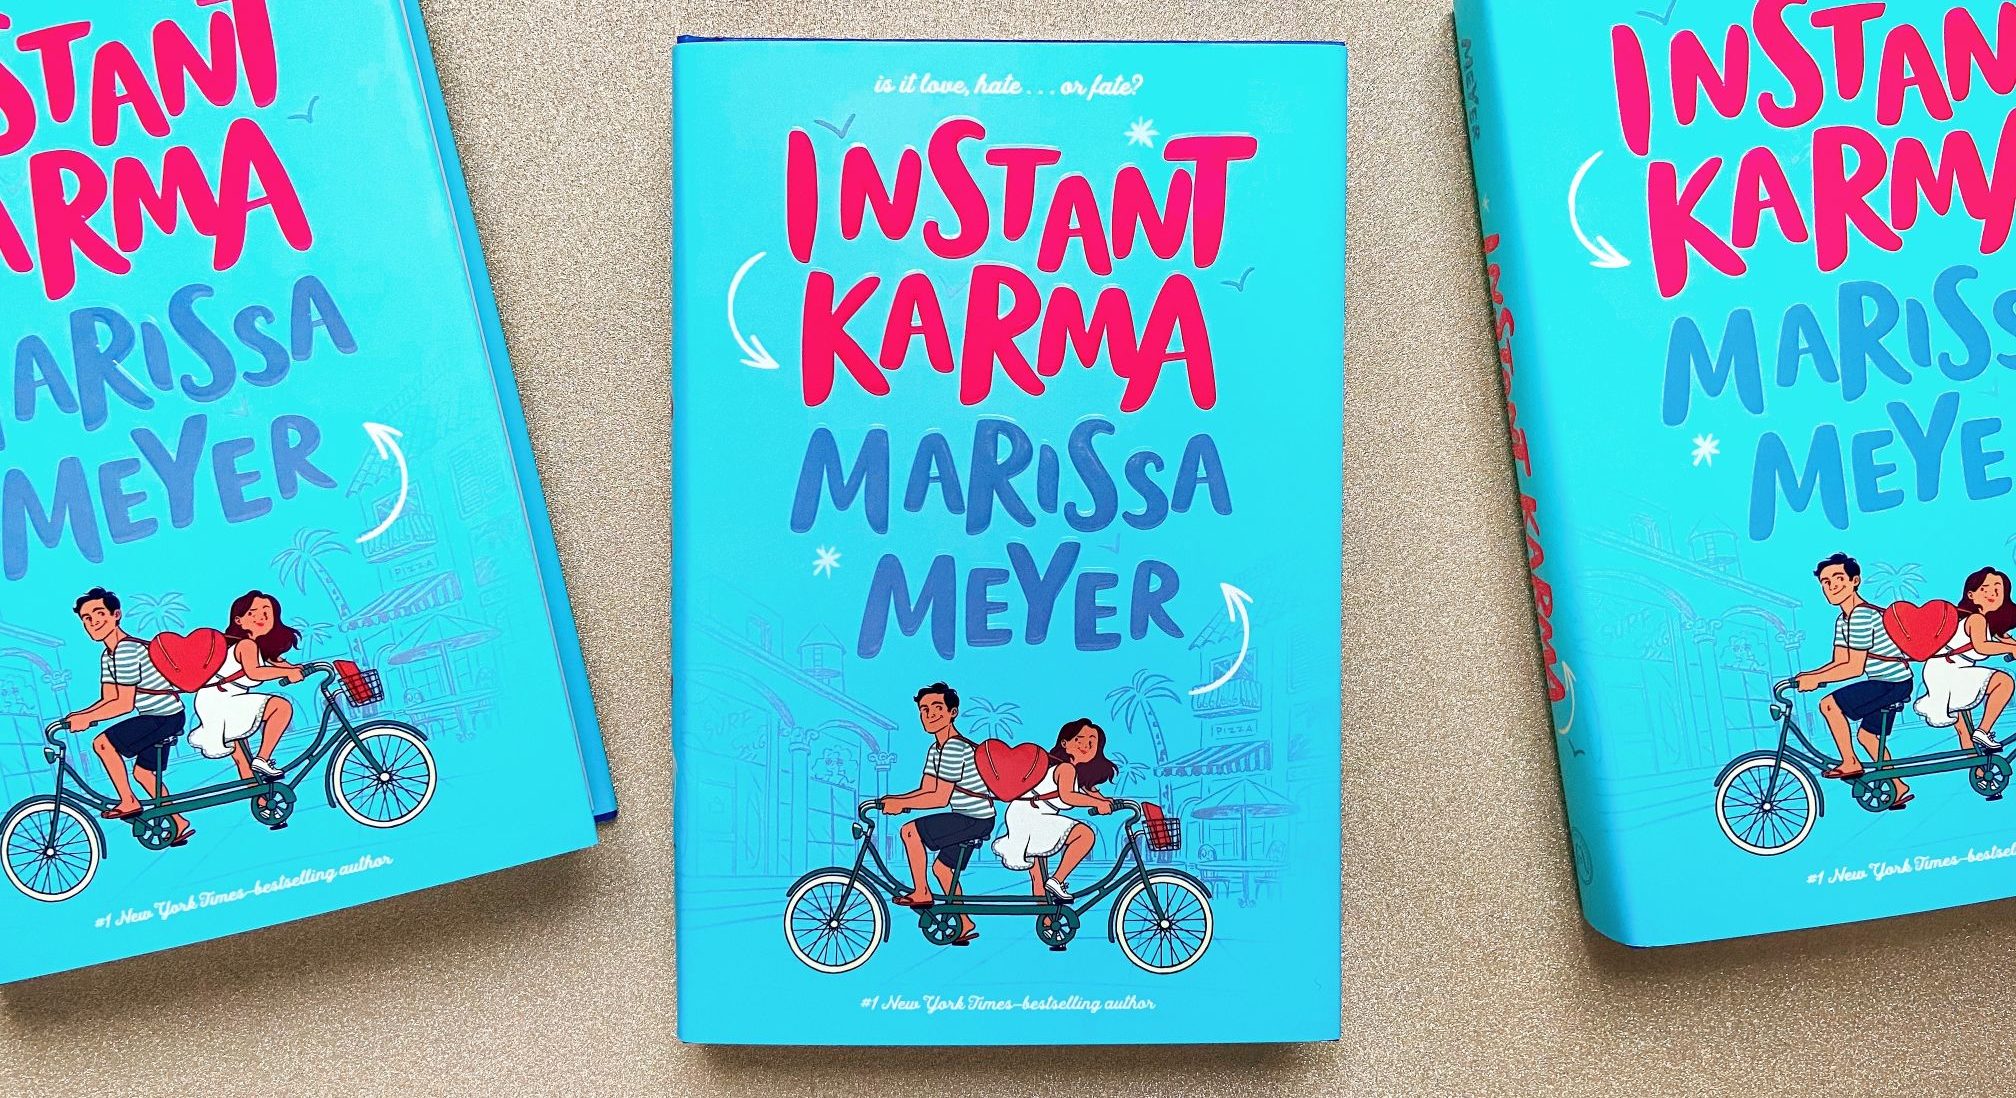 An Interview with Marissa Meyer, Author of Instant Karma